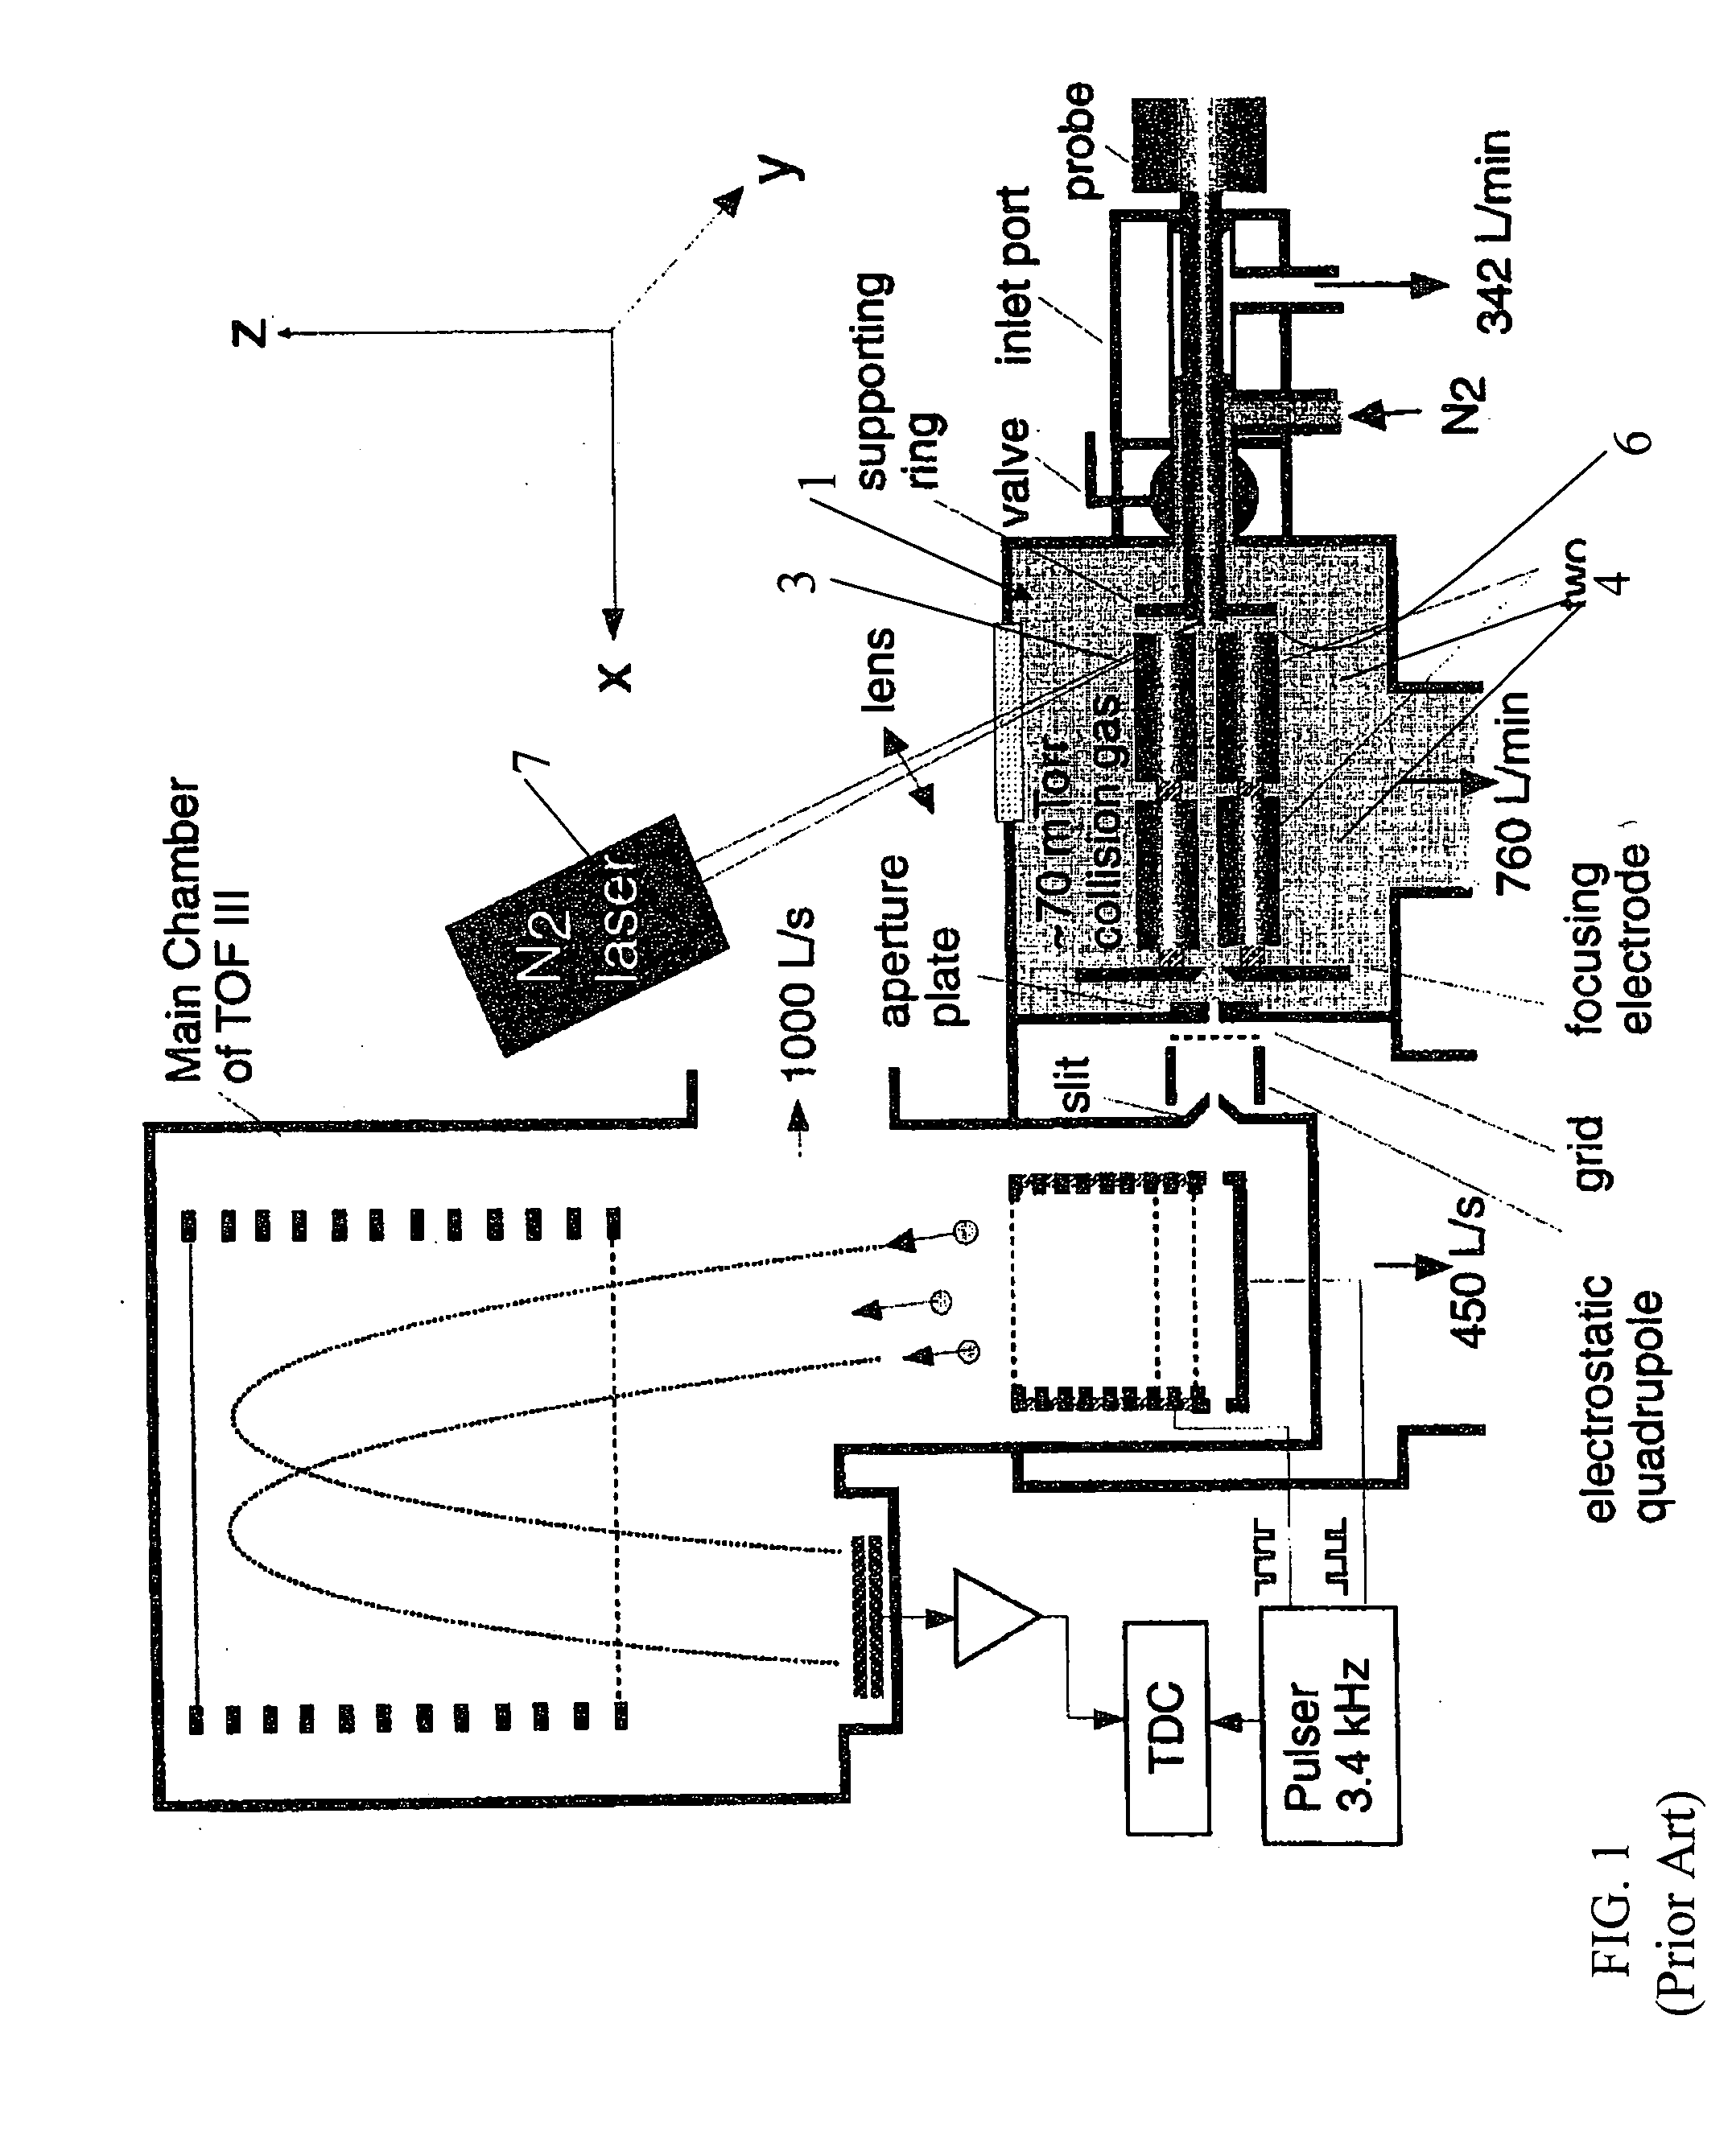 Ion guide for mass spectrometers